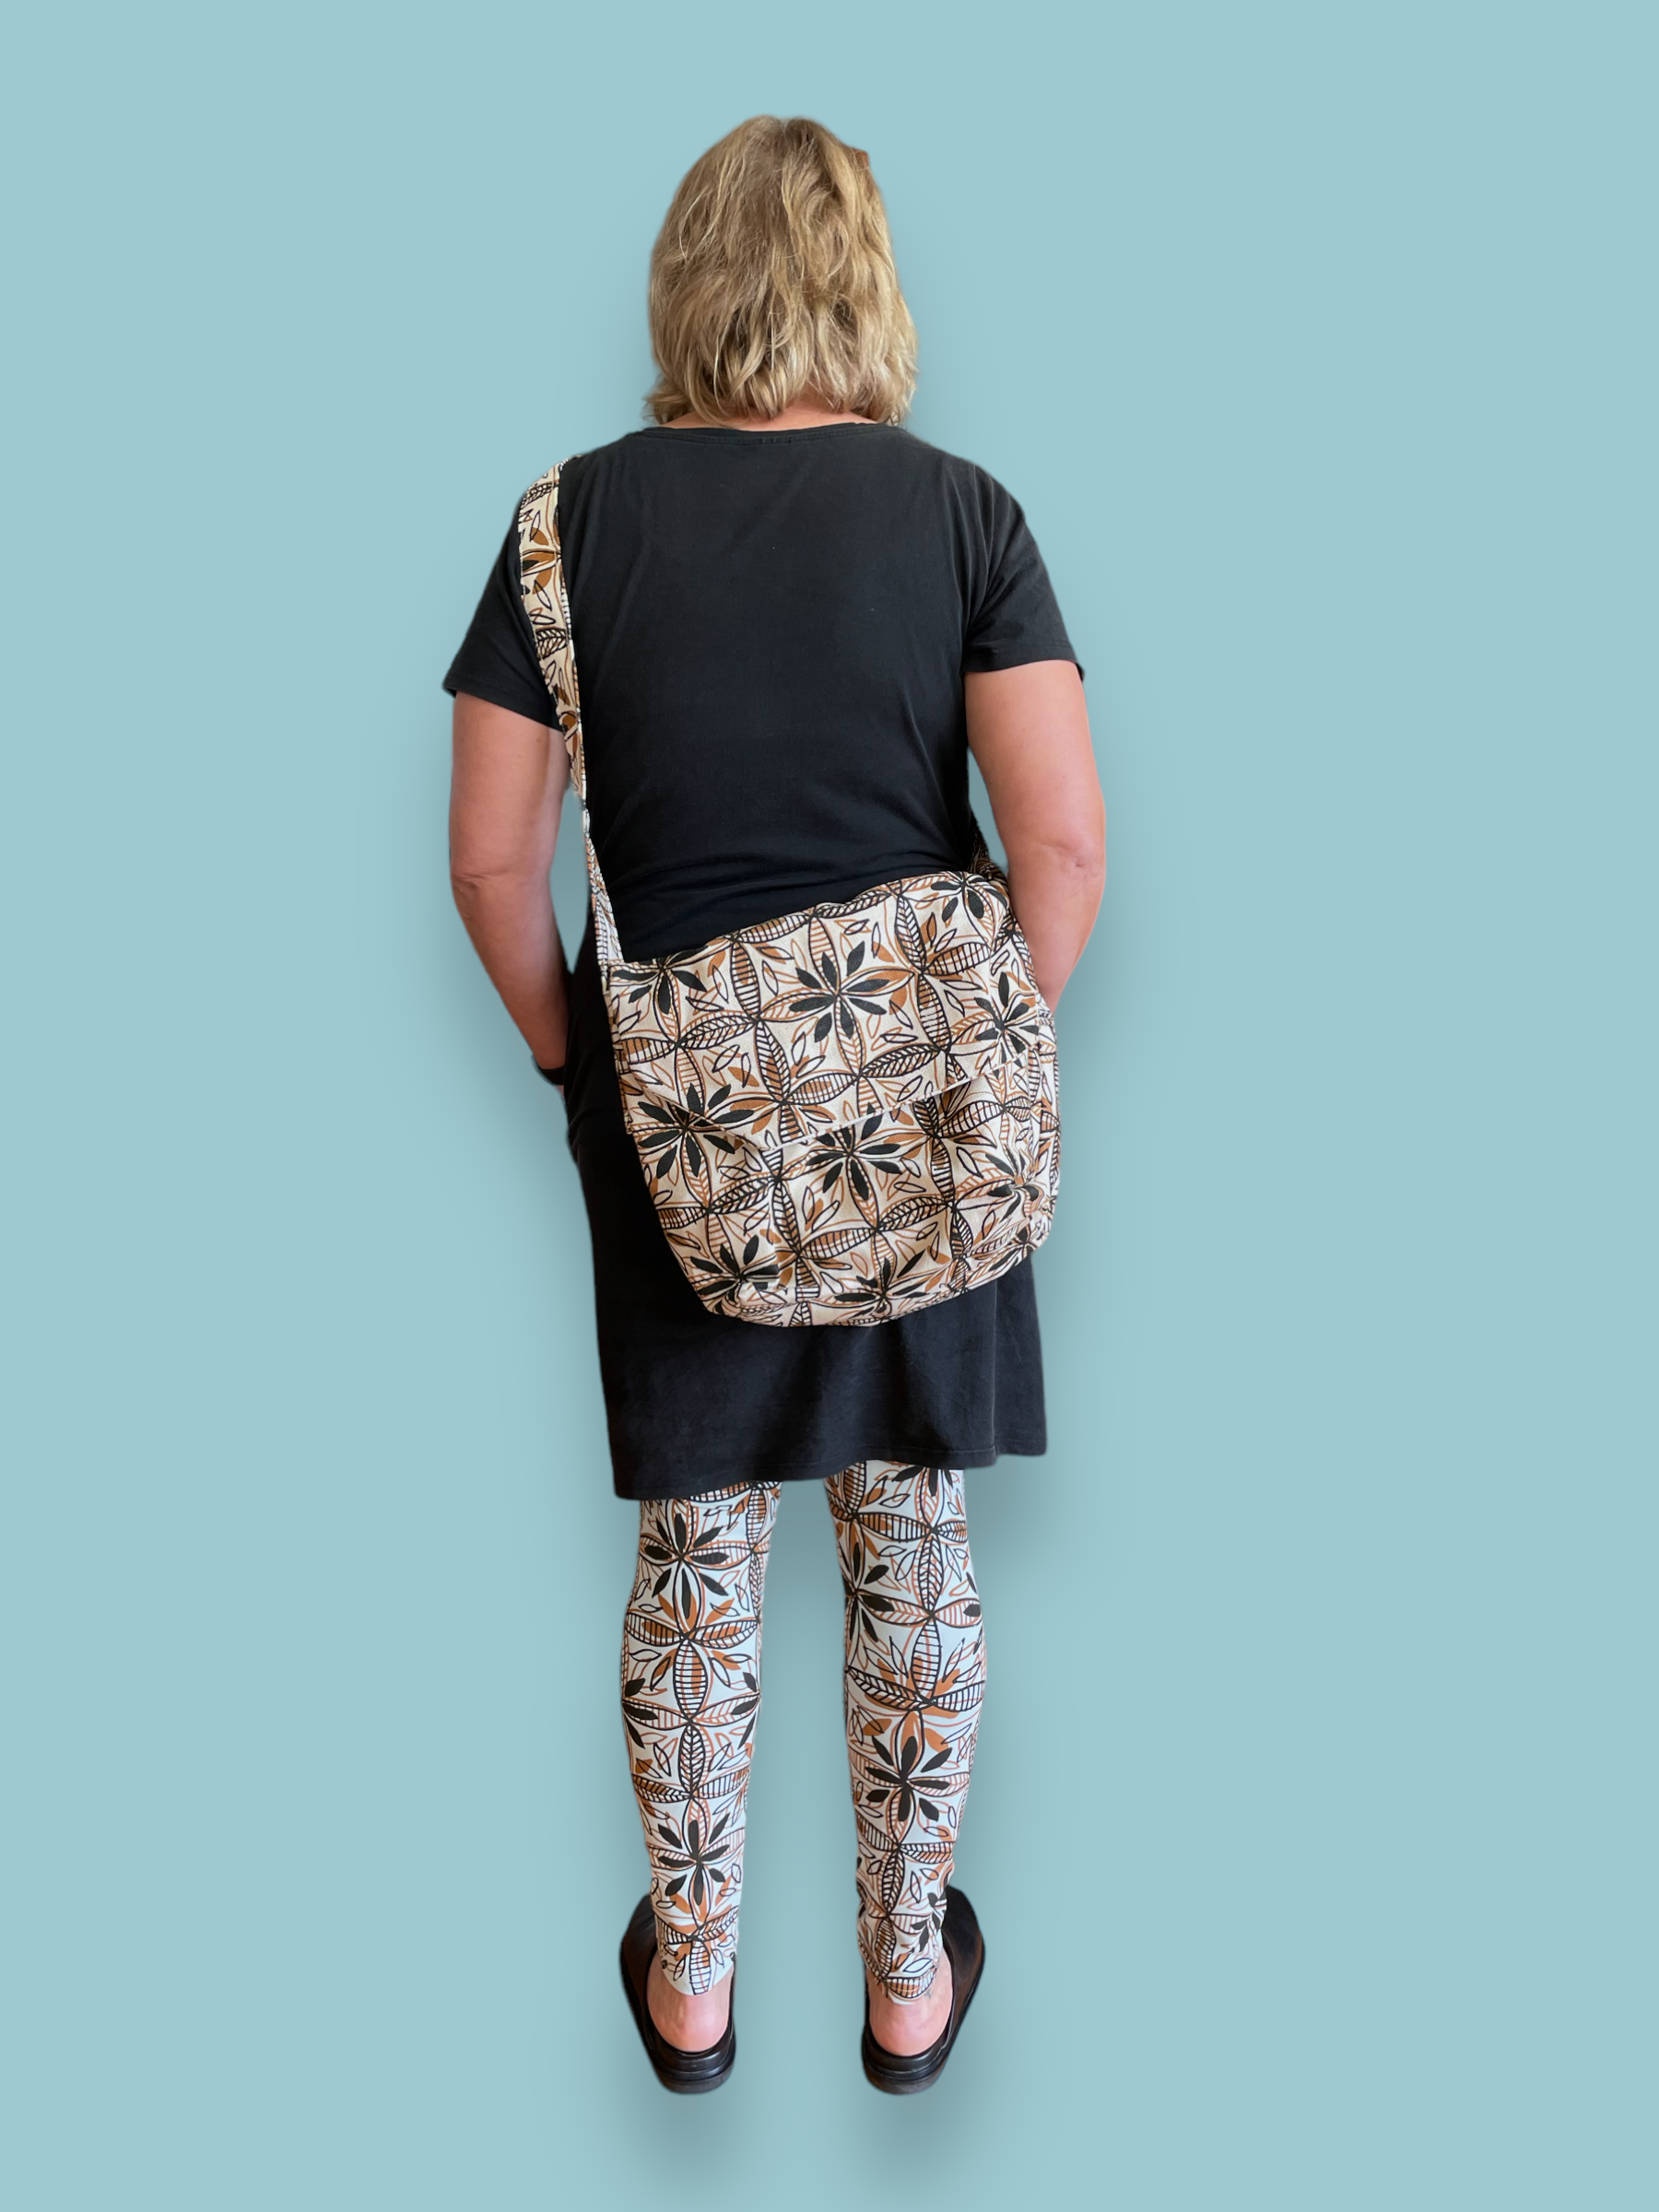 Person wearing satchel with handprinted stylised frangipani flower design